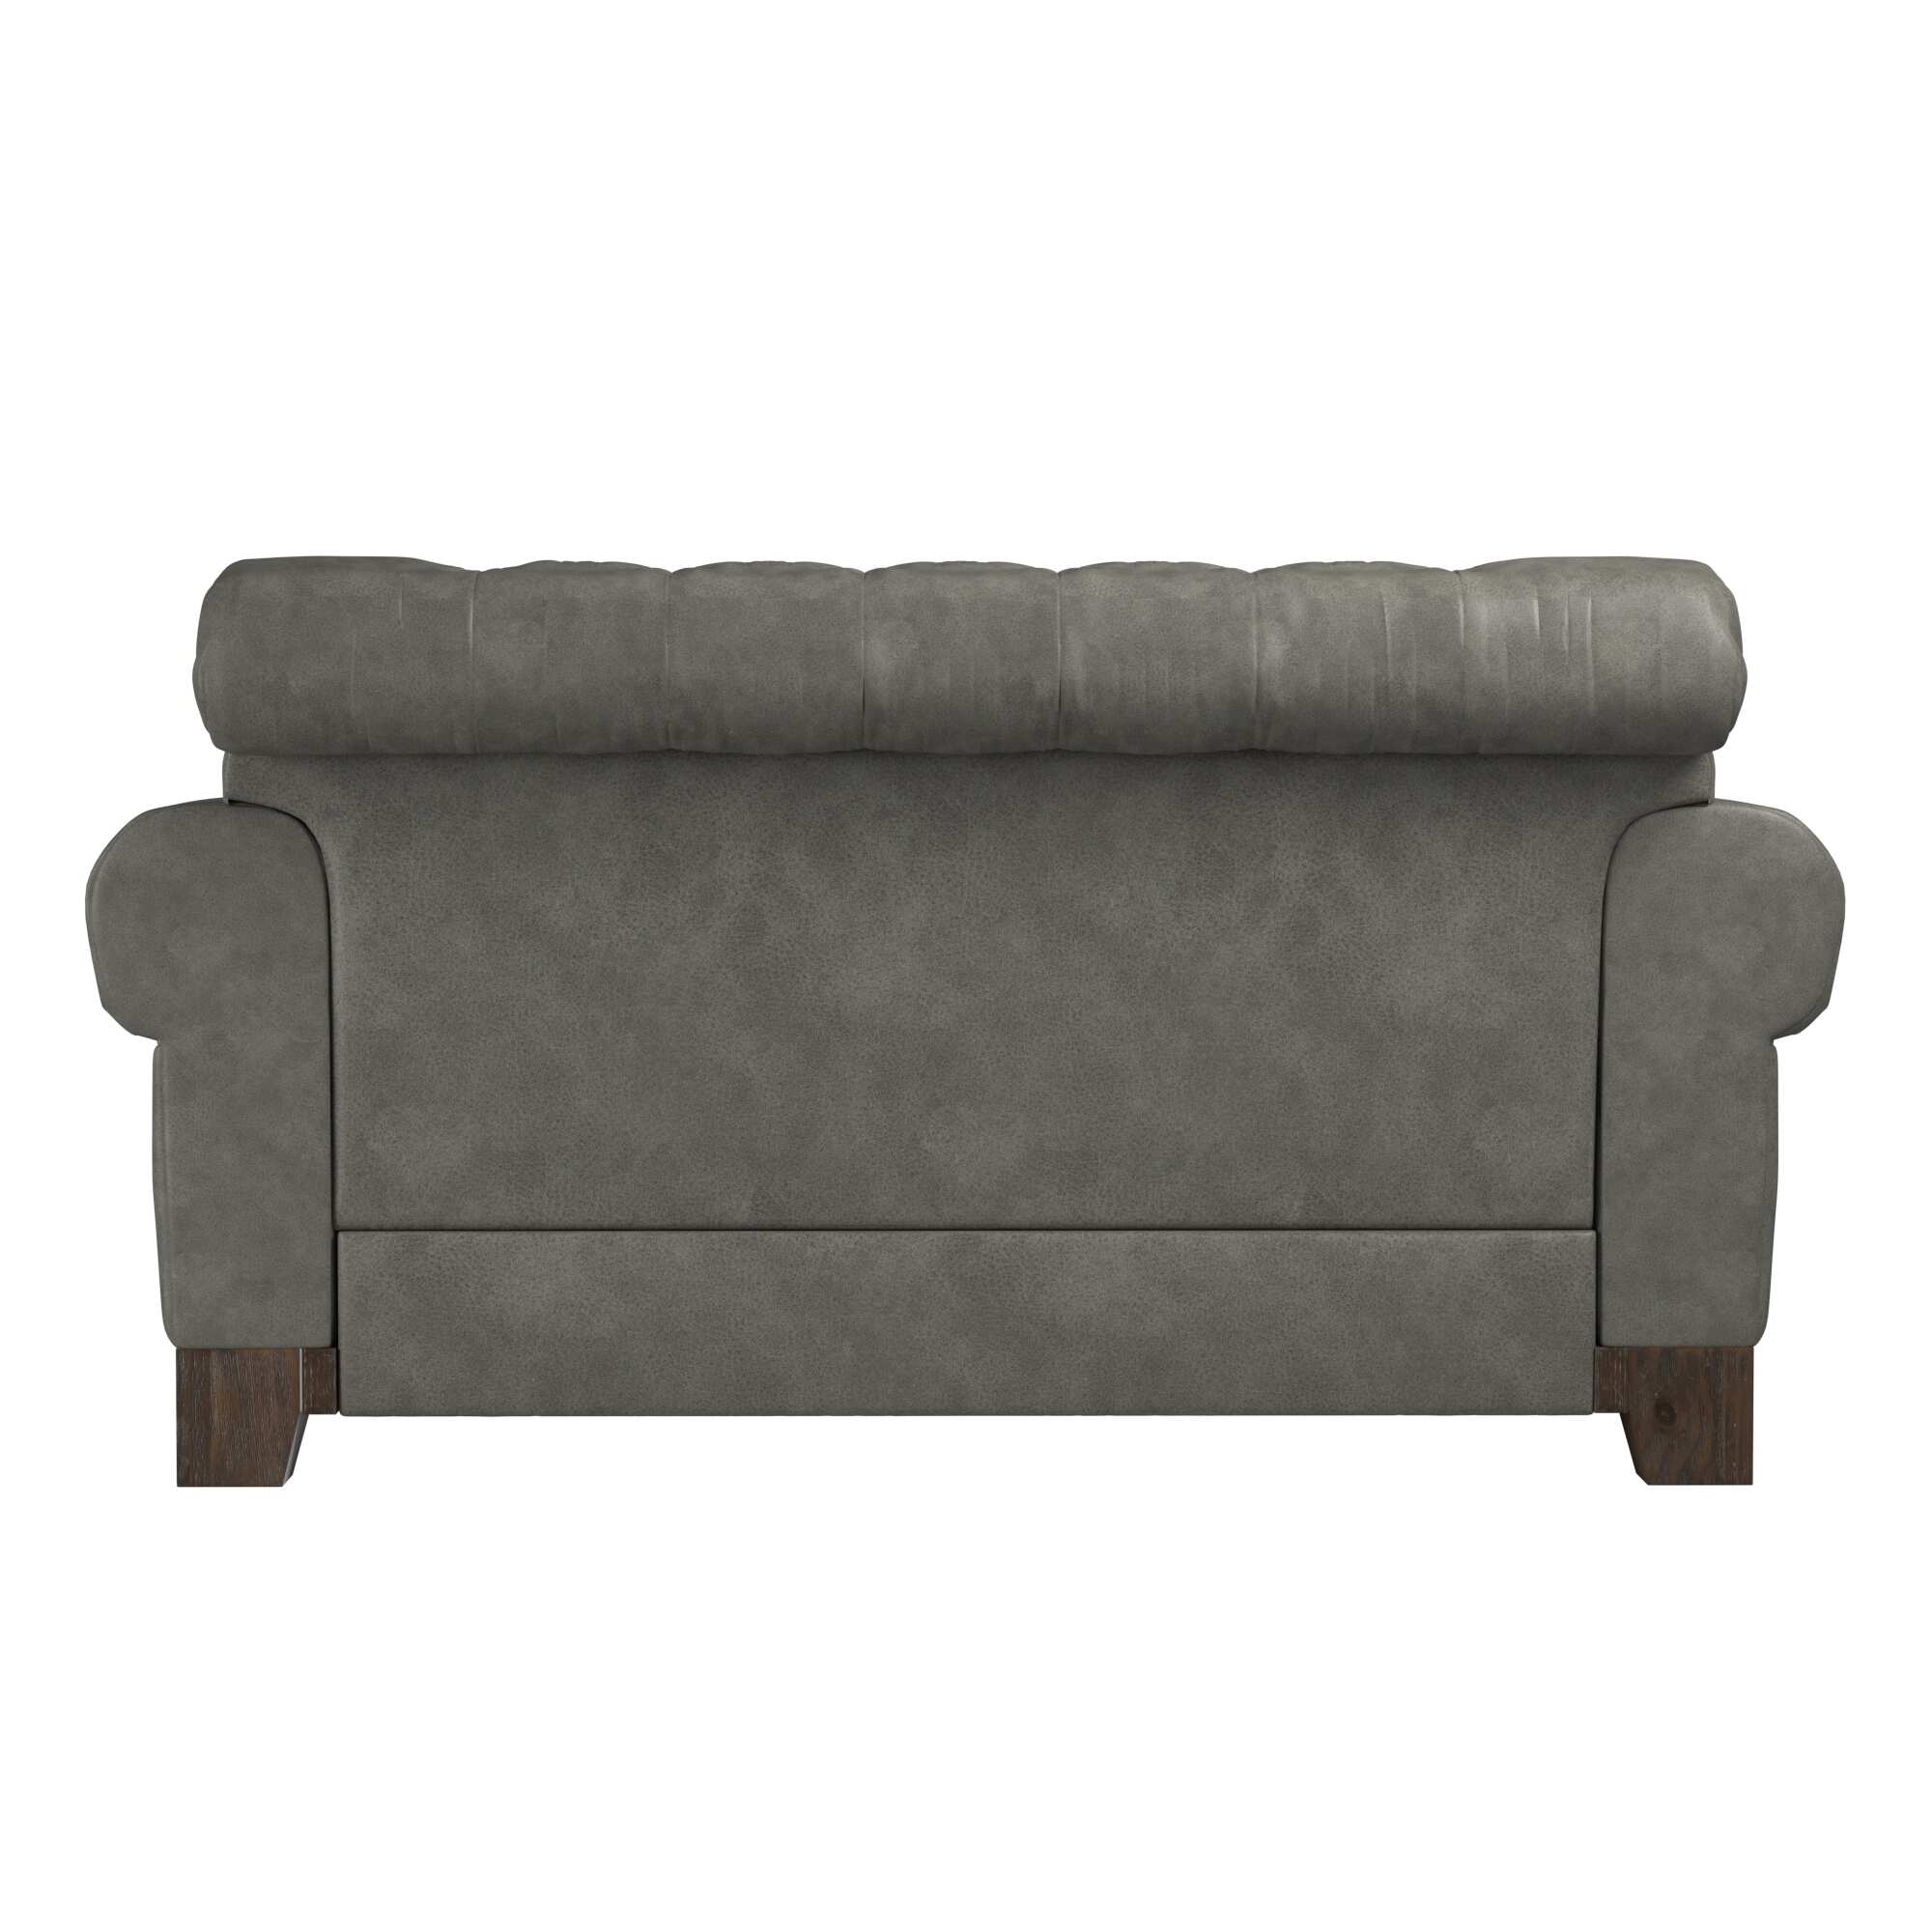 Greenwich Tufted Rolled Arm Nailhead Chesterfield Loveseat by iNSPIRE Q Artisan